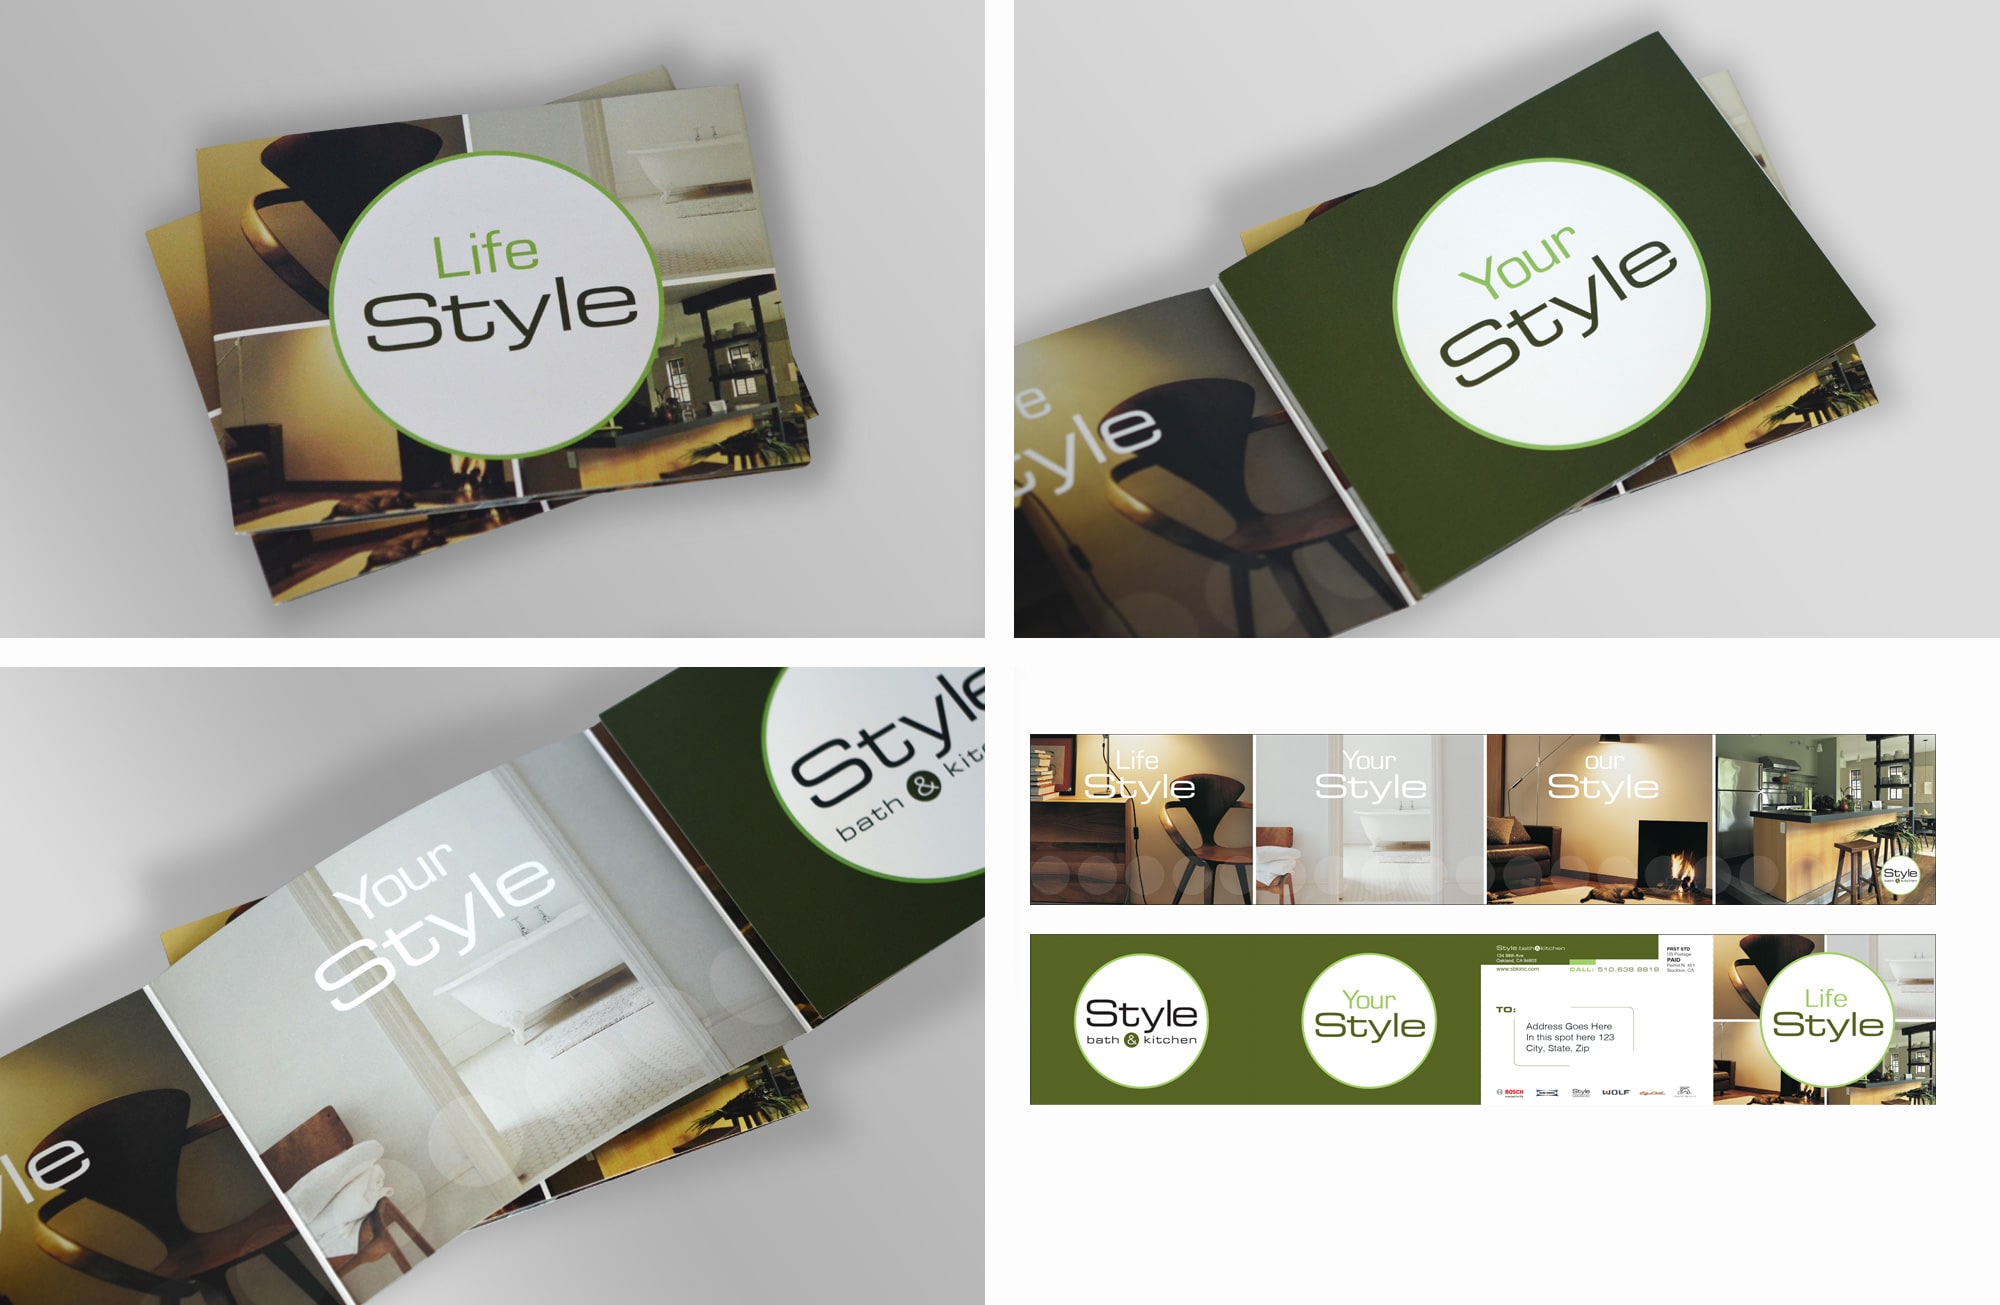  USA, Folding Brochure + Mailer 4 Color + PMS Inks for a  Bright White Uncoated Cover Sheet 